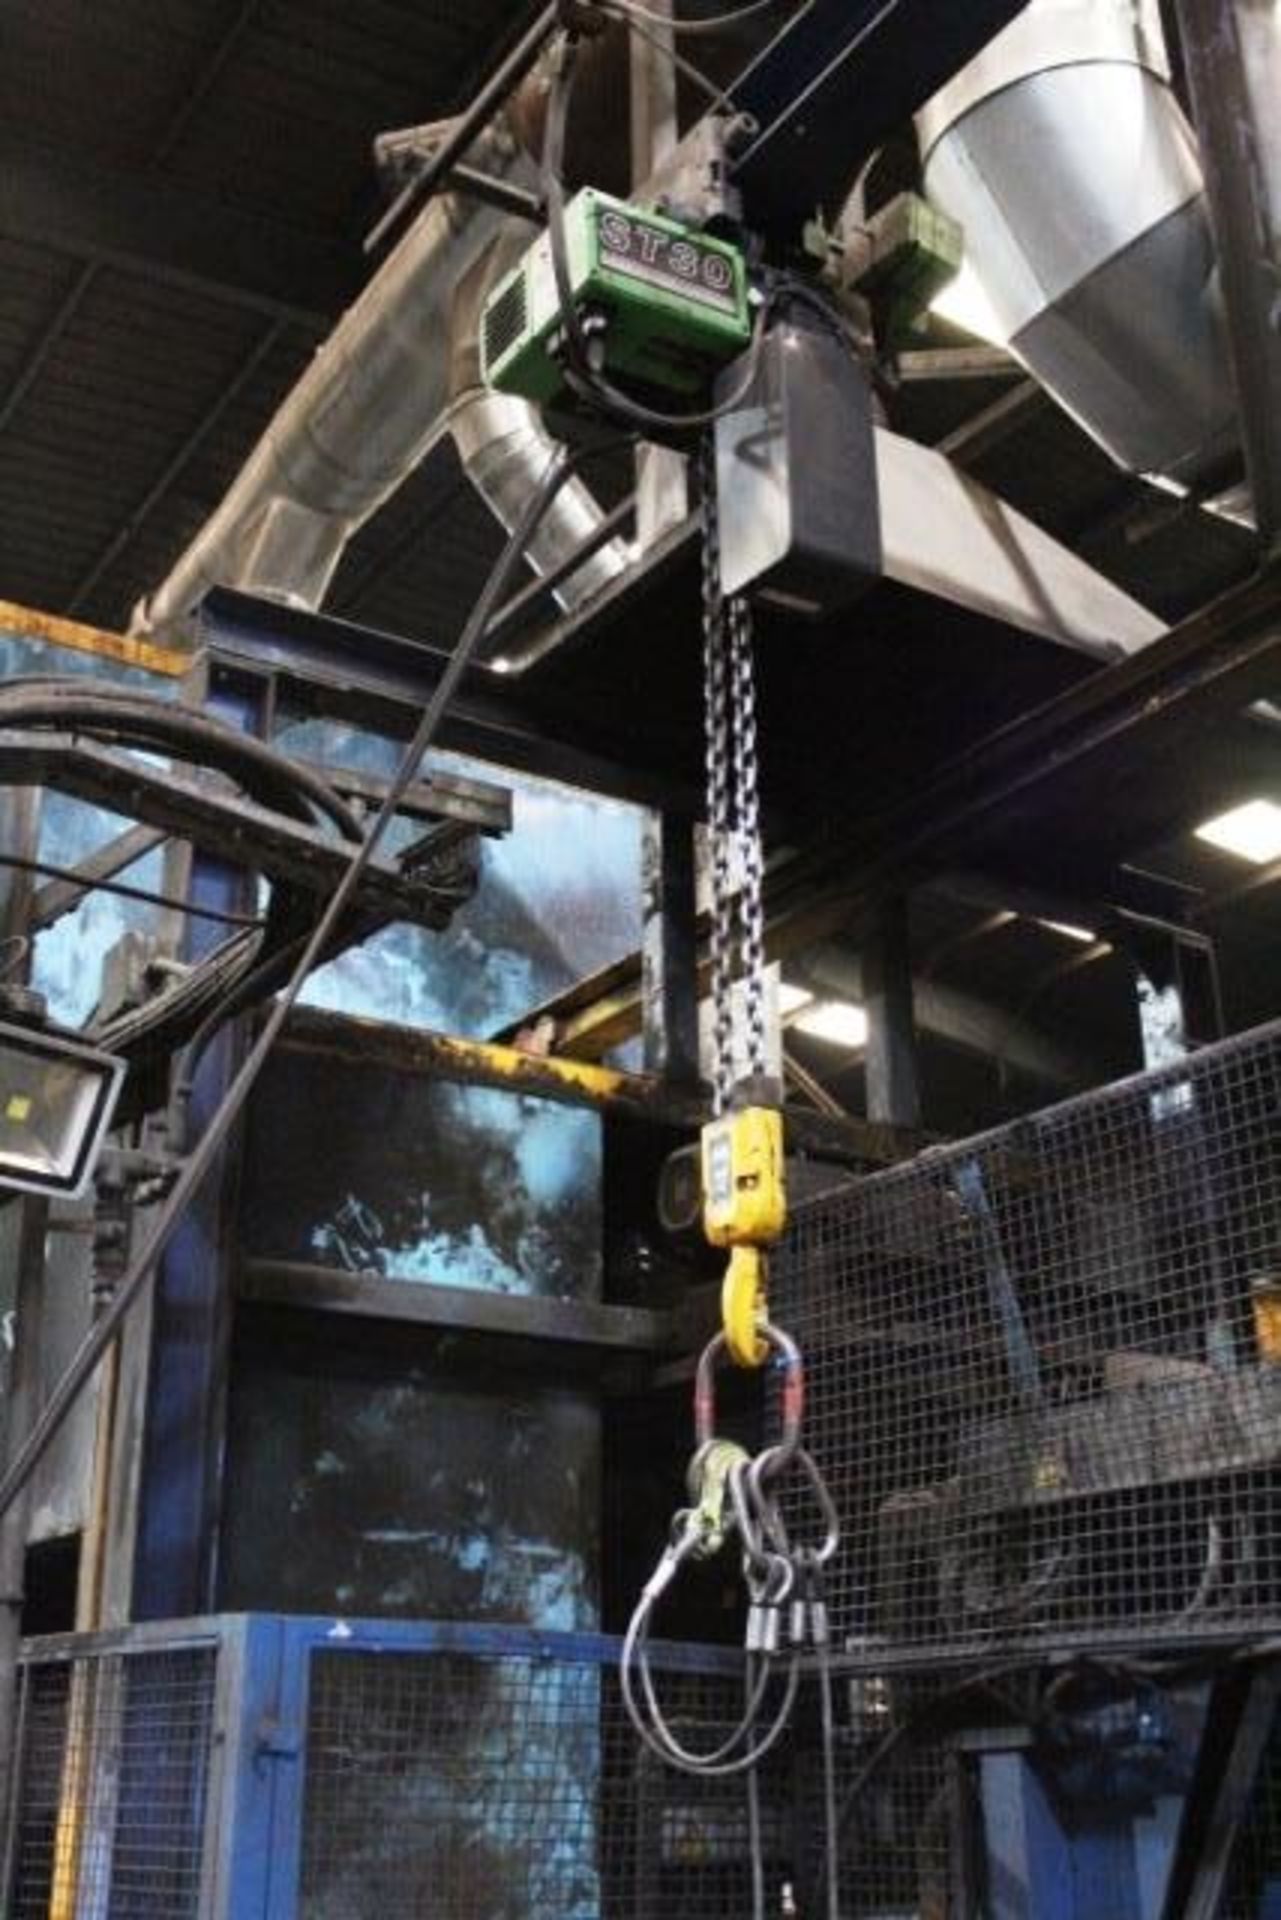 ST30 electric chain hoist, 2500kg lift capacity with pendant control, Please note: purchaser must - Image 2 of 3